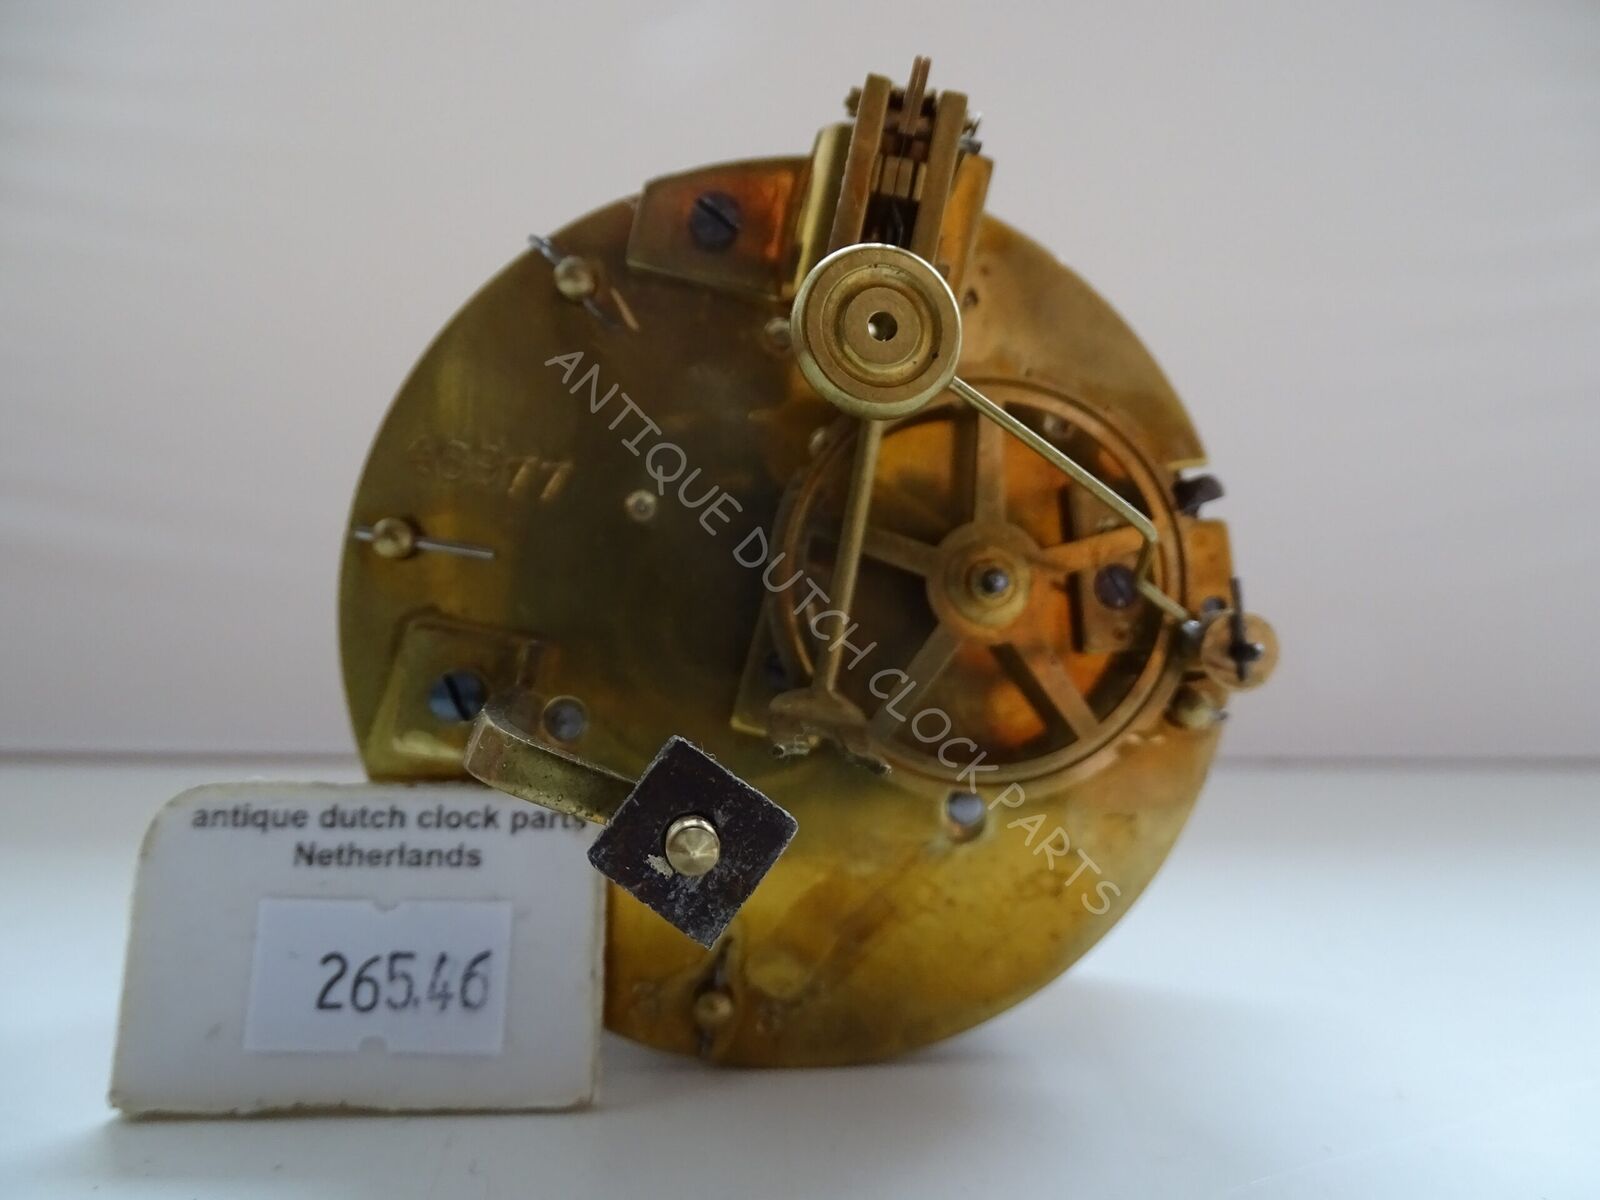 OVERHAULED FRENCH CLOCKWORK 3 8. IN EXCELLENT WORKING CONDITION